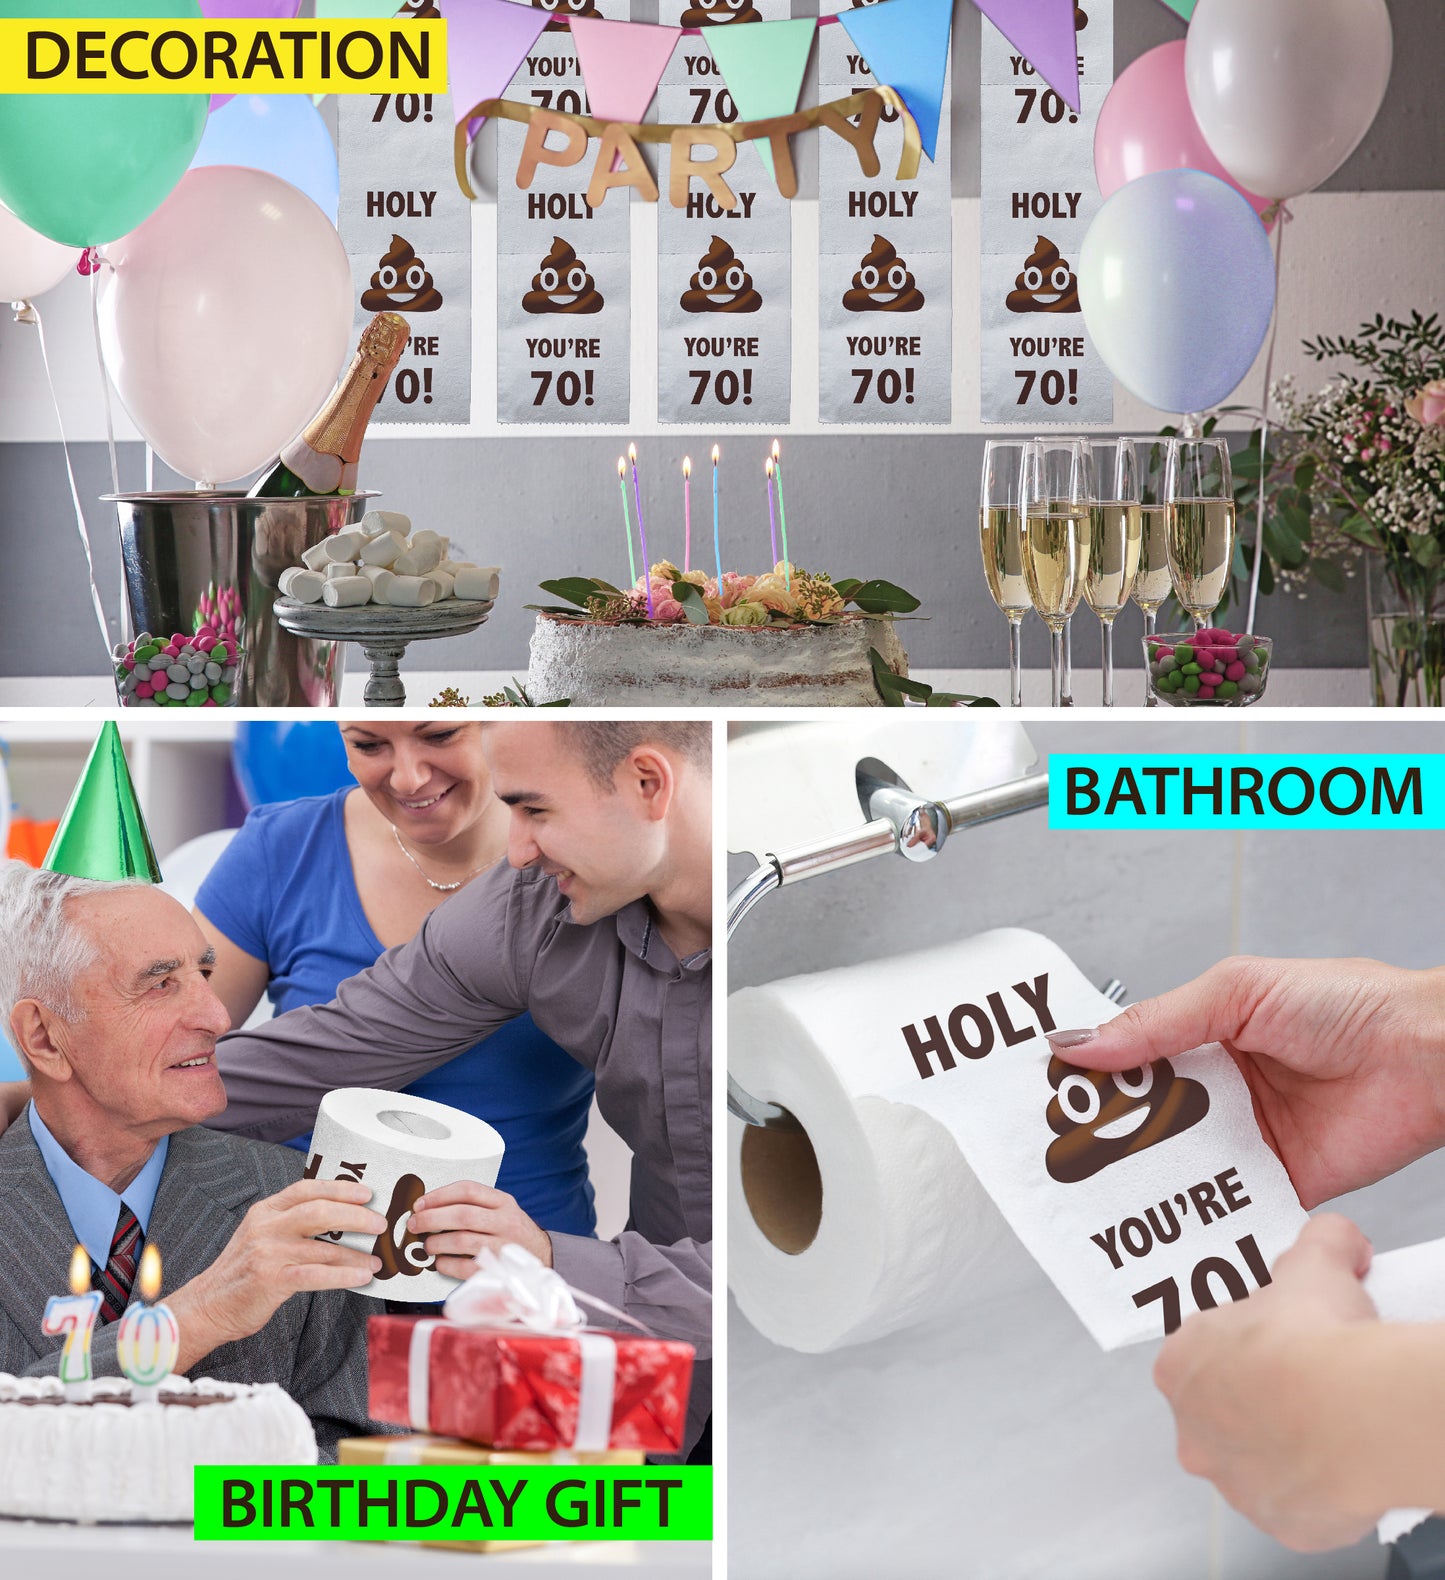 Printed TP Holy Poop You're 70 Funny Toilet Paper Roll Birthday Party Gag Gift